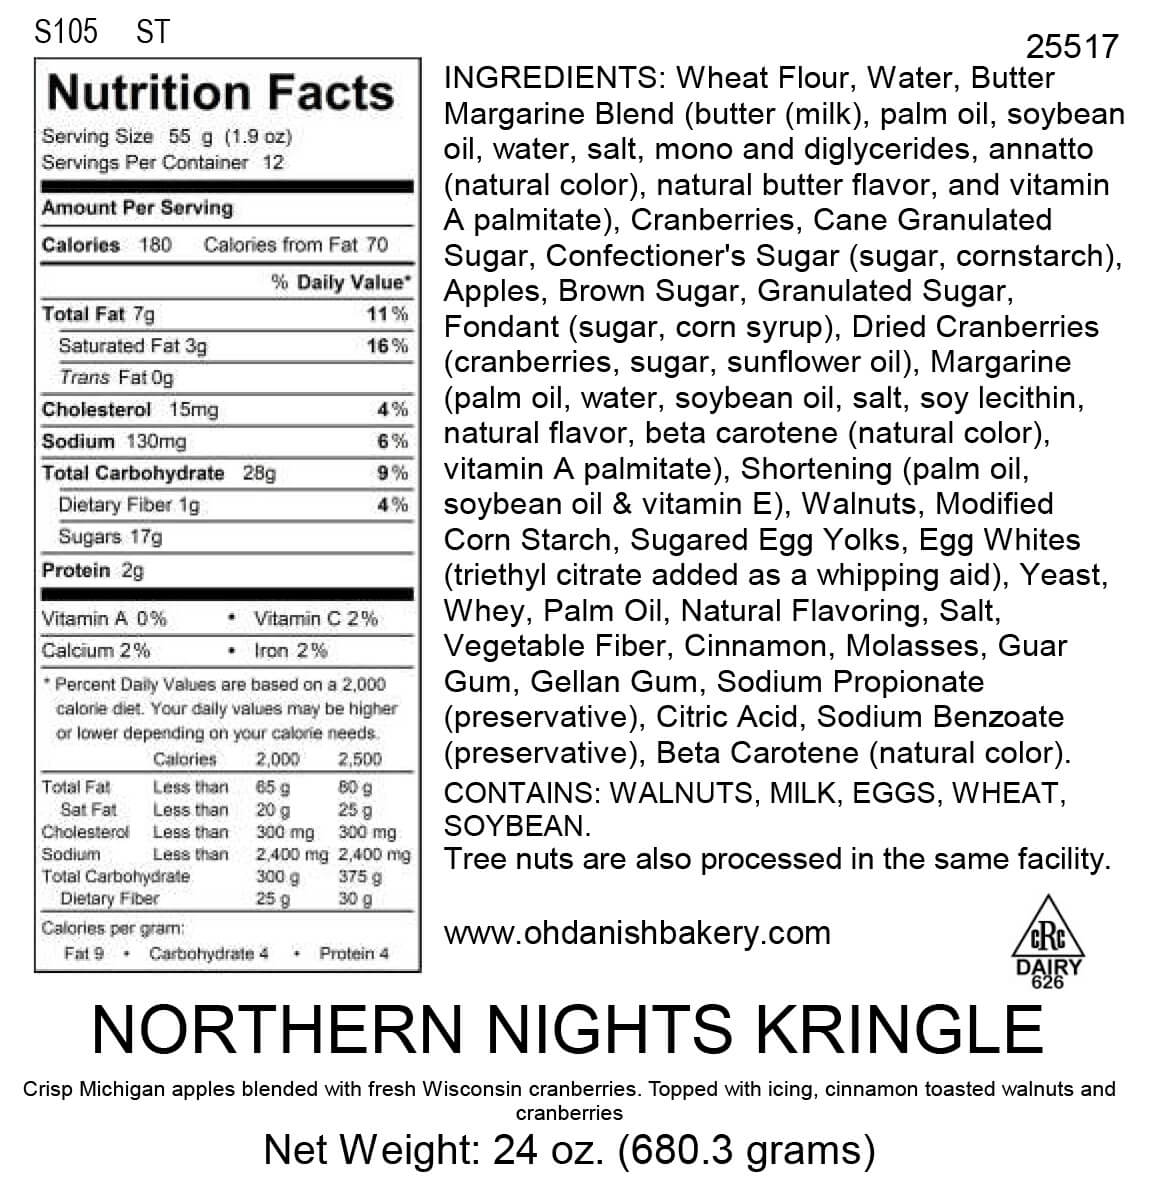 Nutritional Label for Northern Nights Kringle